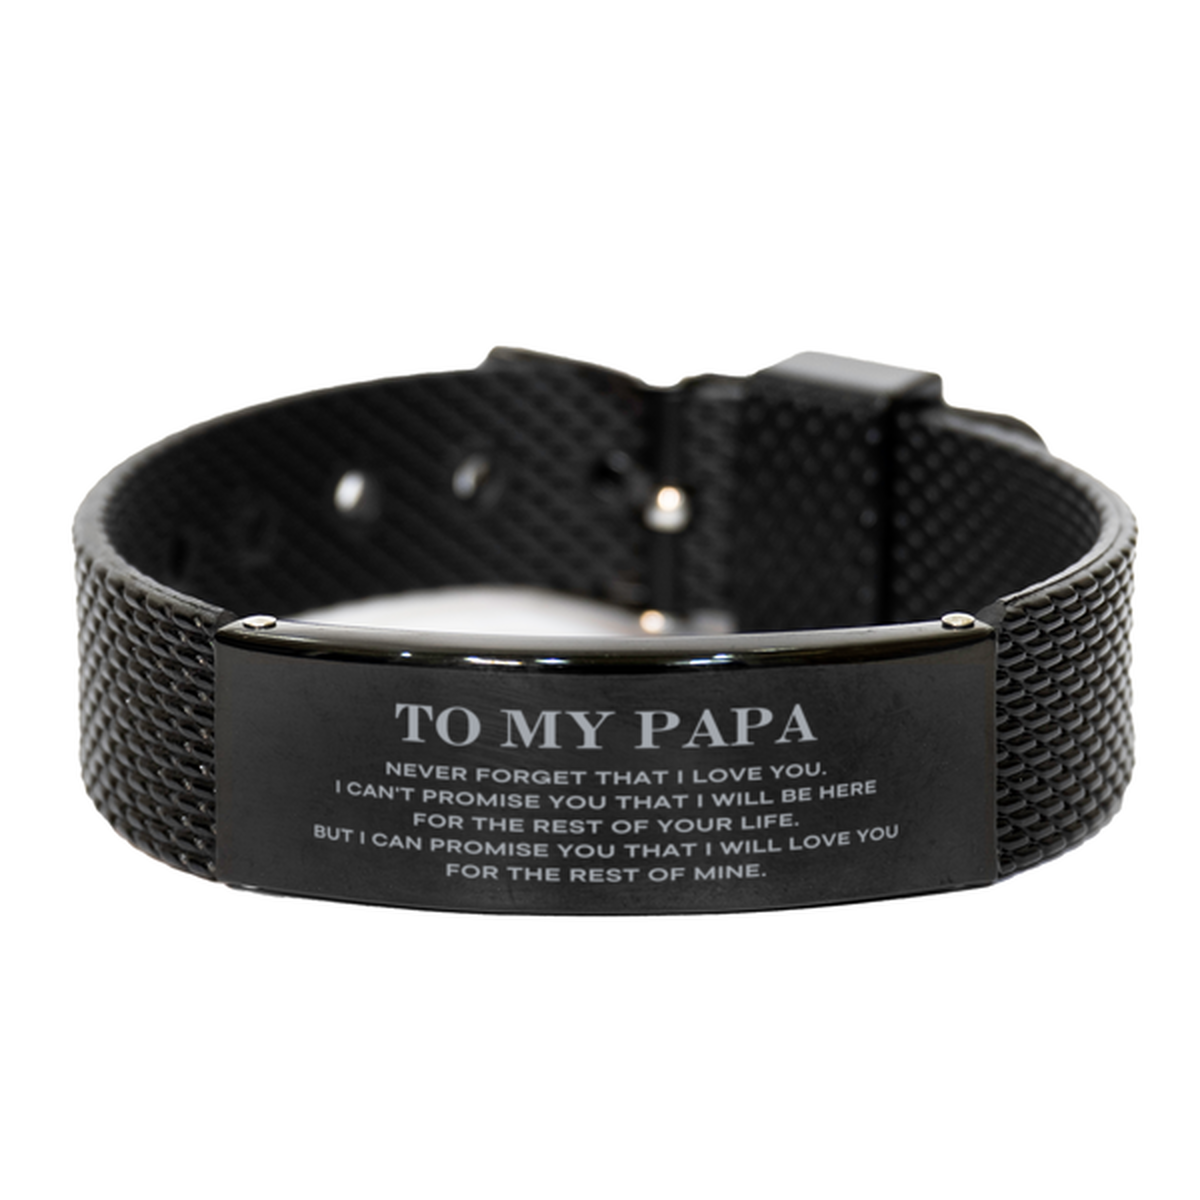 To My Papa Gifts, I will love you for the rest of mine, Love Papa Bracelet, Birthday Christmas Unique Black Shark Mesh Bracelet For Papa